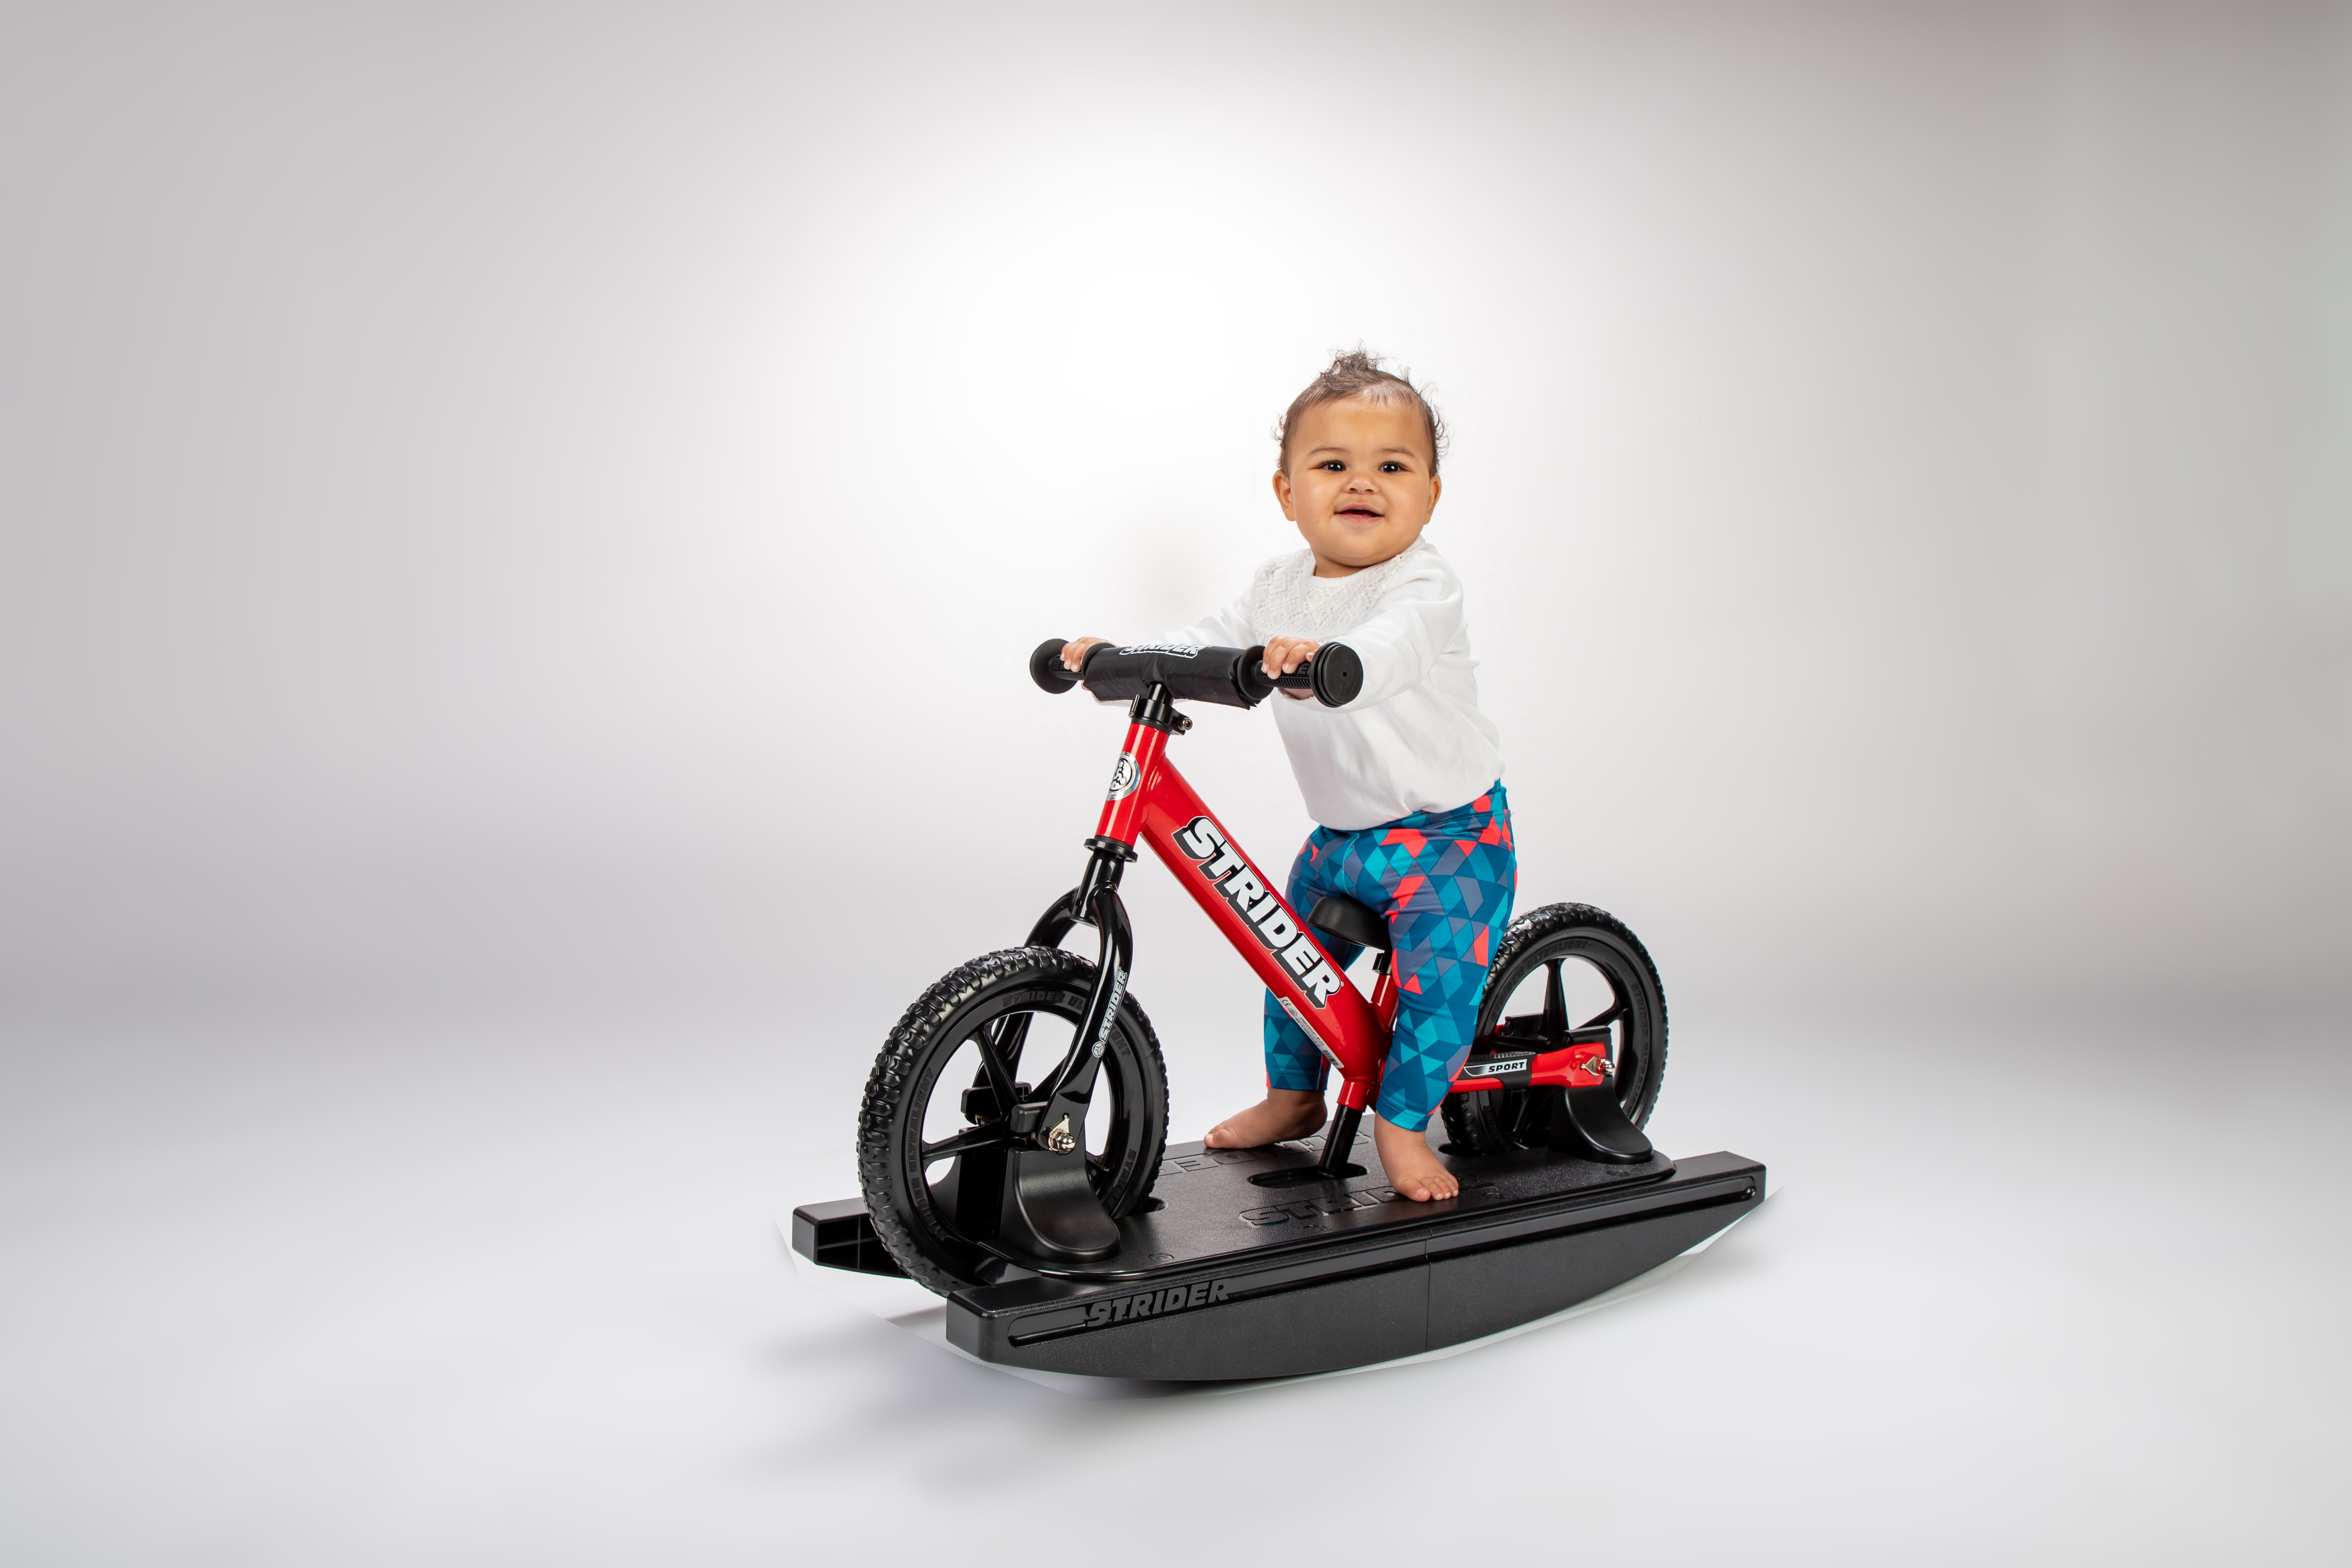 Strider - 12 Sport 2-in-1 Rocking Bike for Toddlers, Ages 6 Months to 5  Years - Red